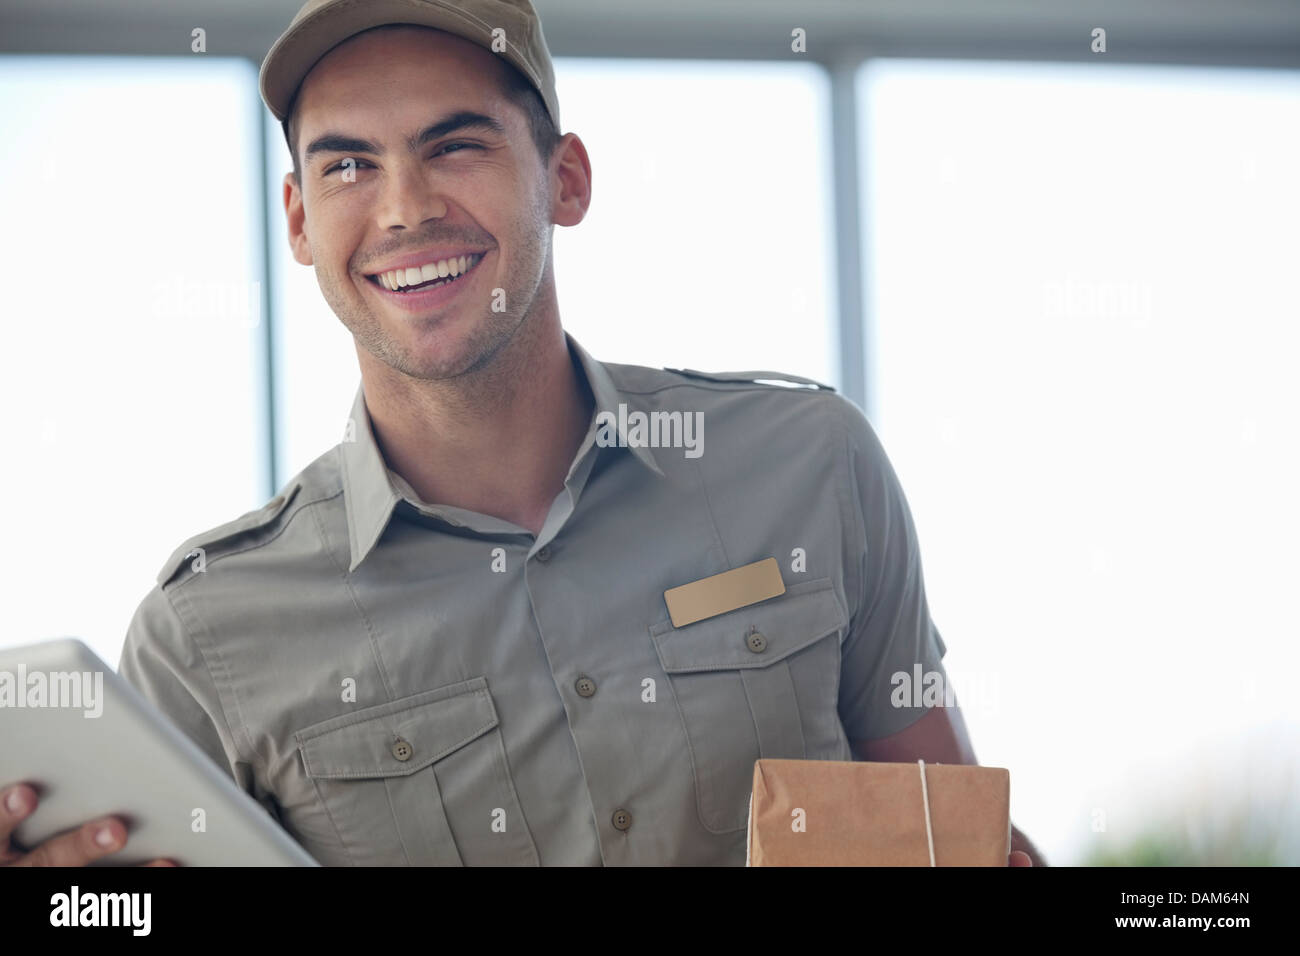 Delivery boy smiling with package Stock Photo